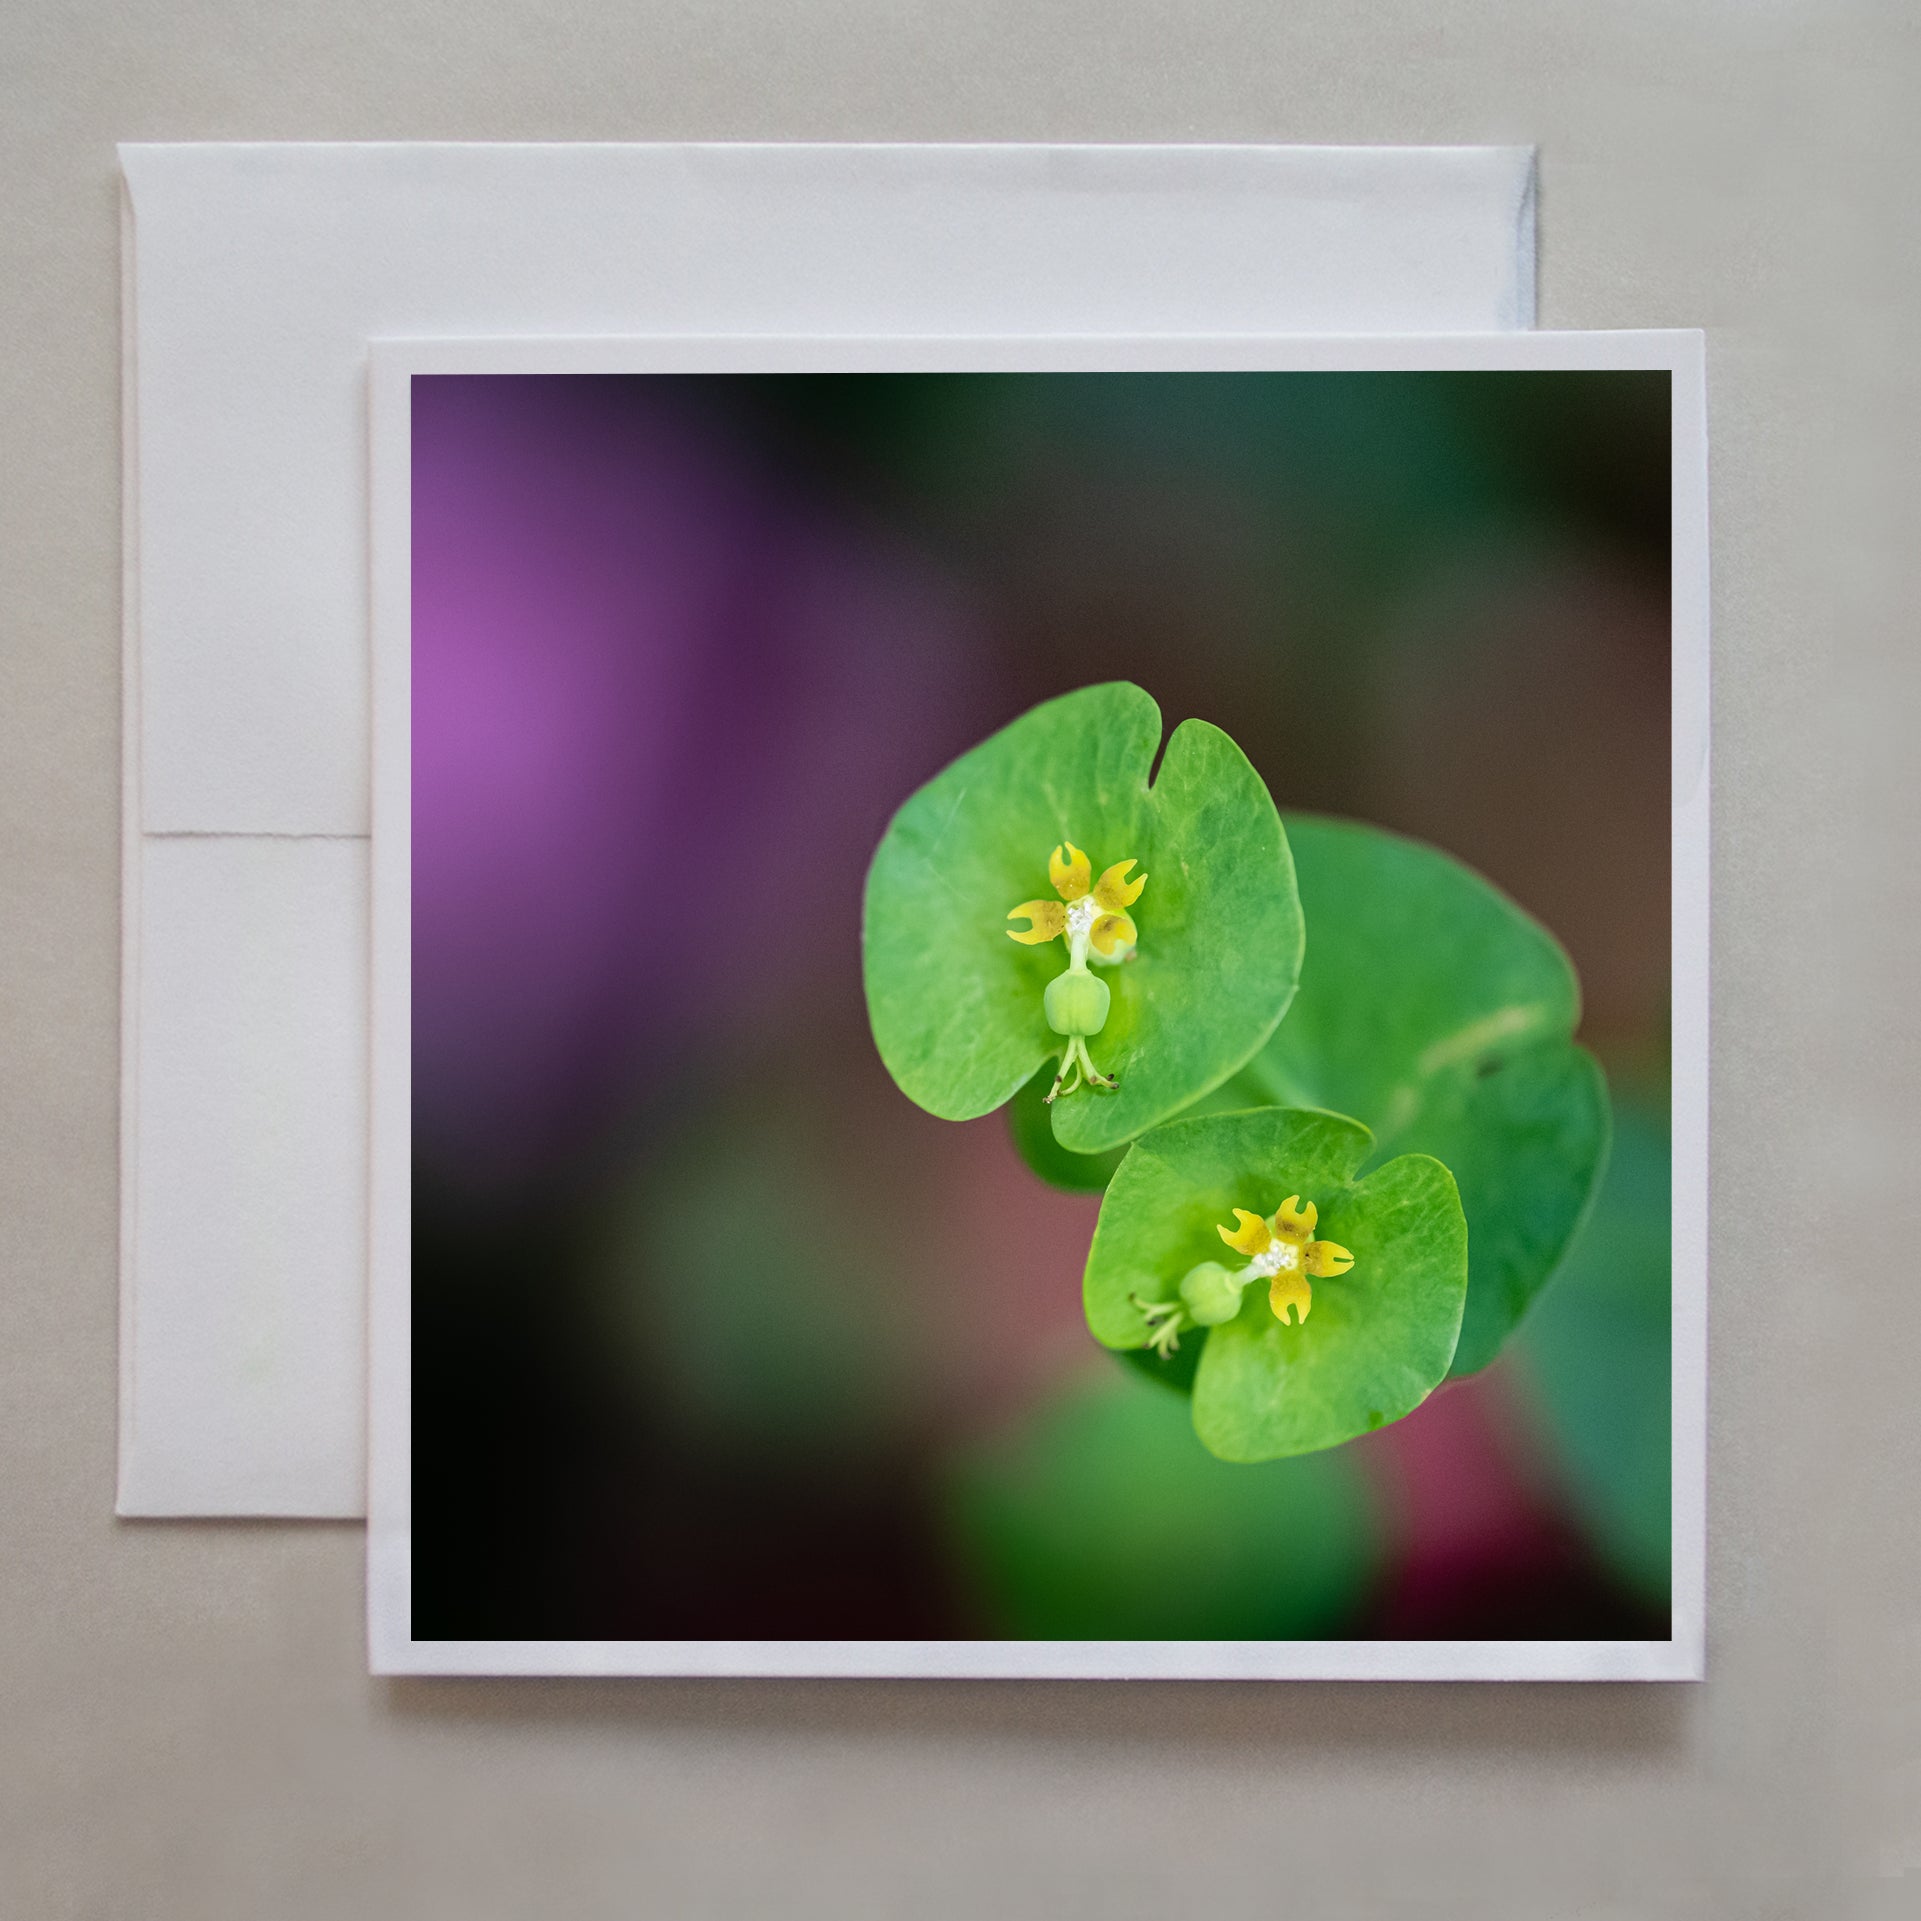 A photograph of the poisonous Euphorbia plant in full bloom by photographer Judy Harrison Cochand.